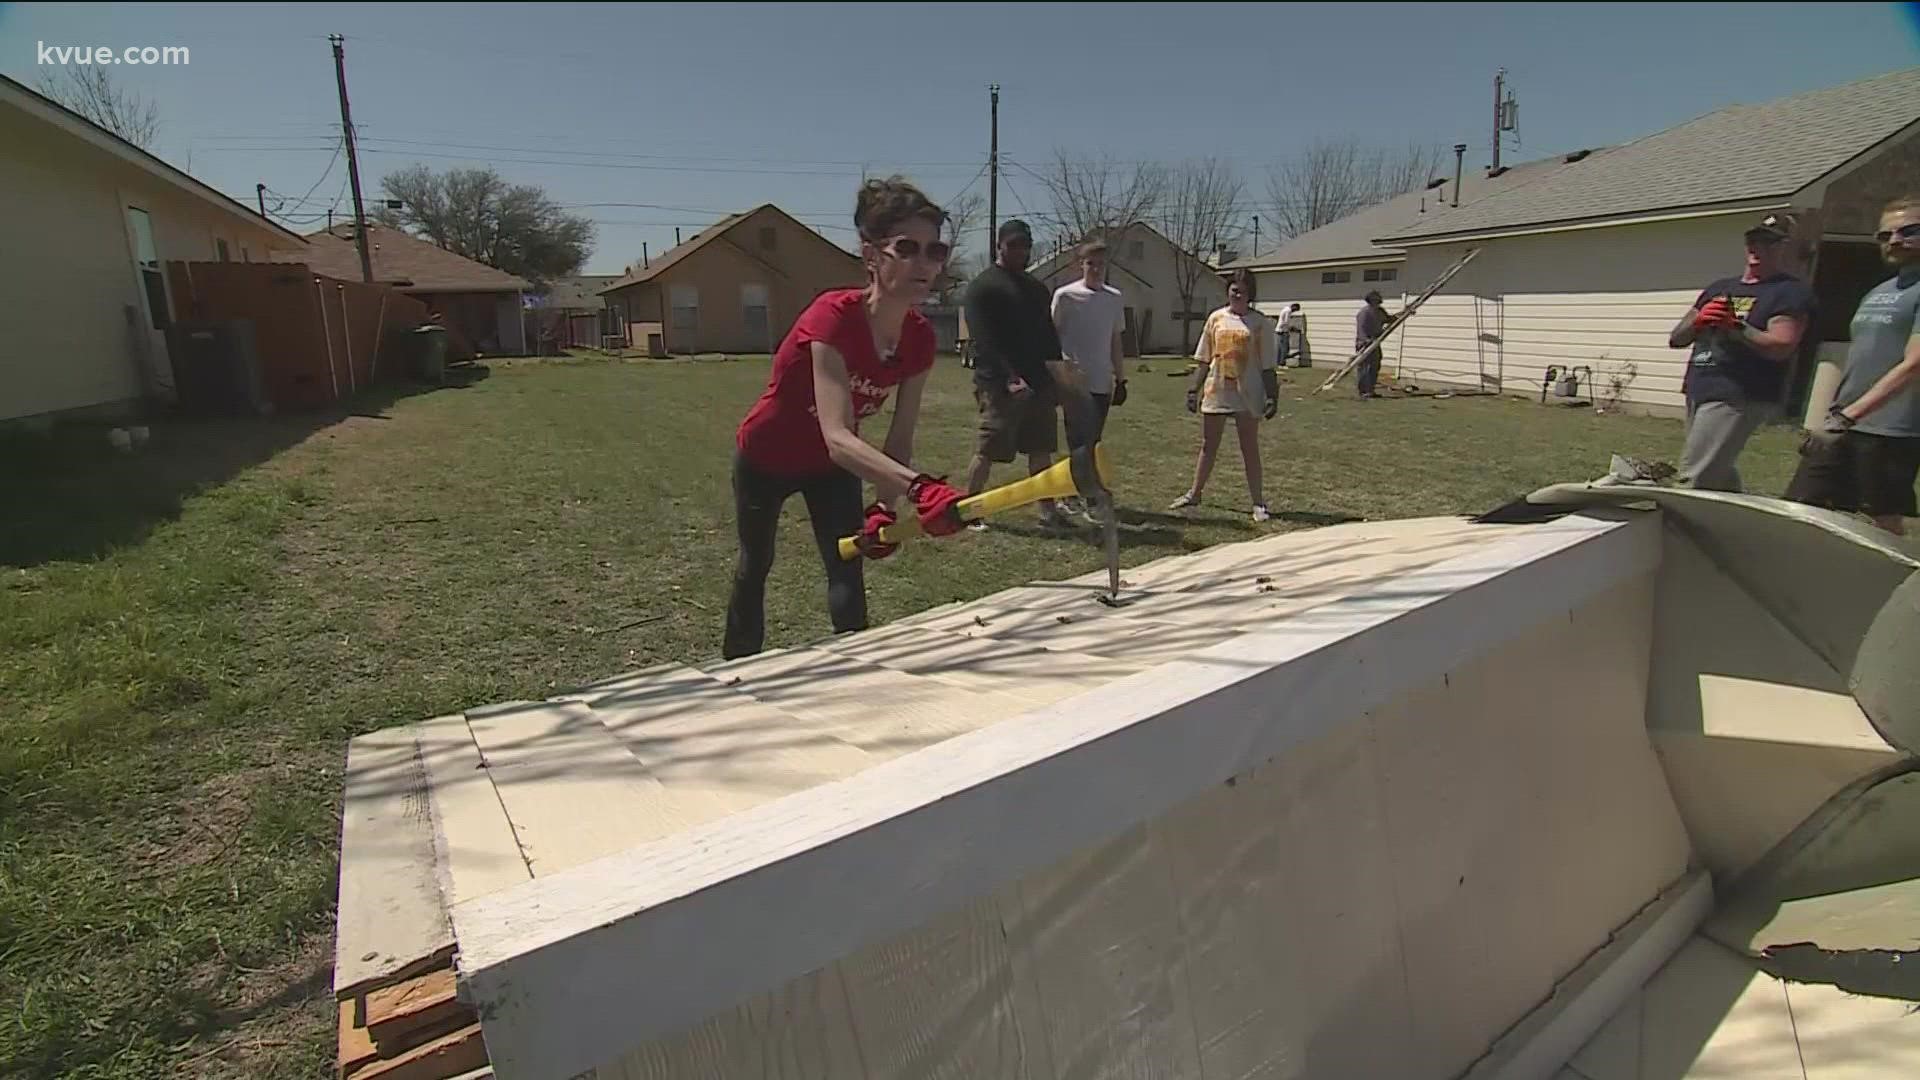 Neighbors gathered to help those impacted by the tornadoes, hoping to take a bit of weight off the shoulders of those whose homes were left damaged or destroyed.